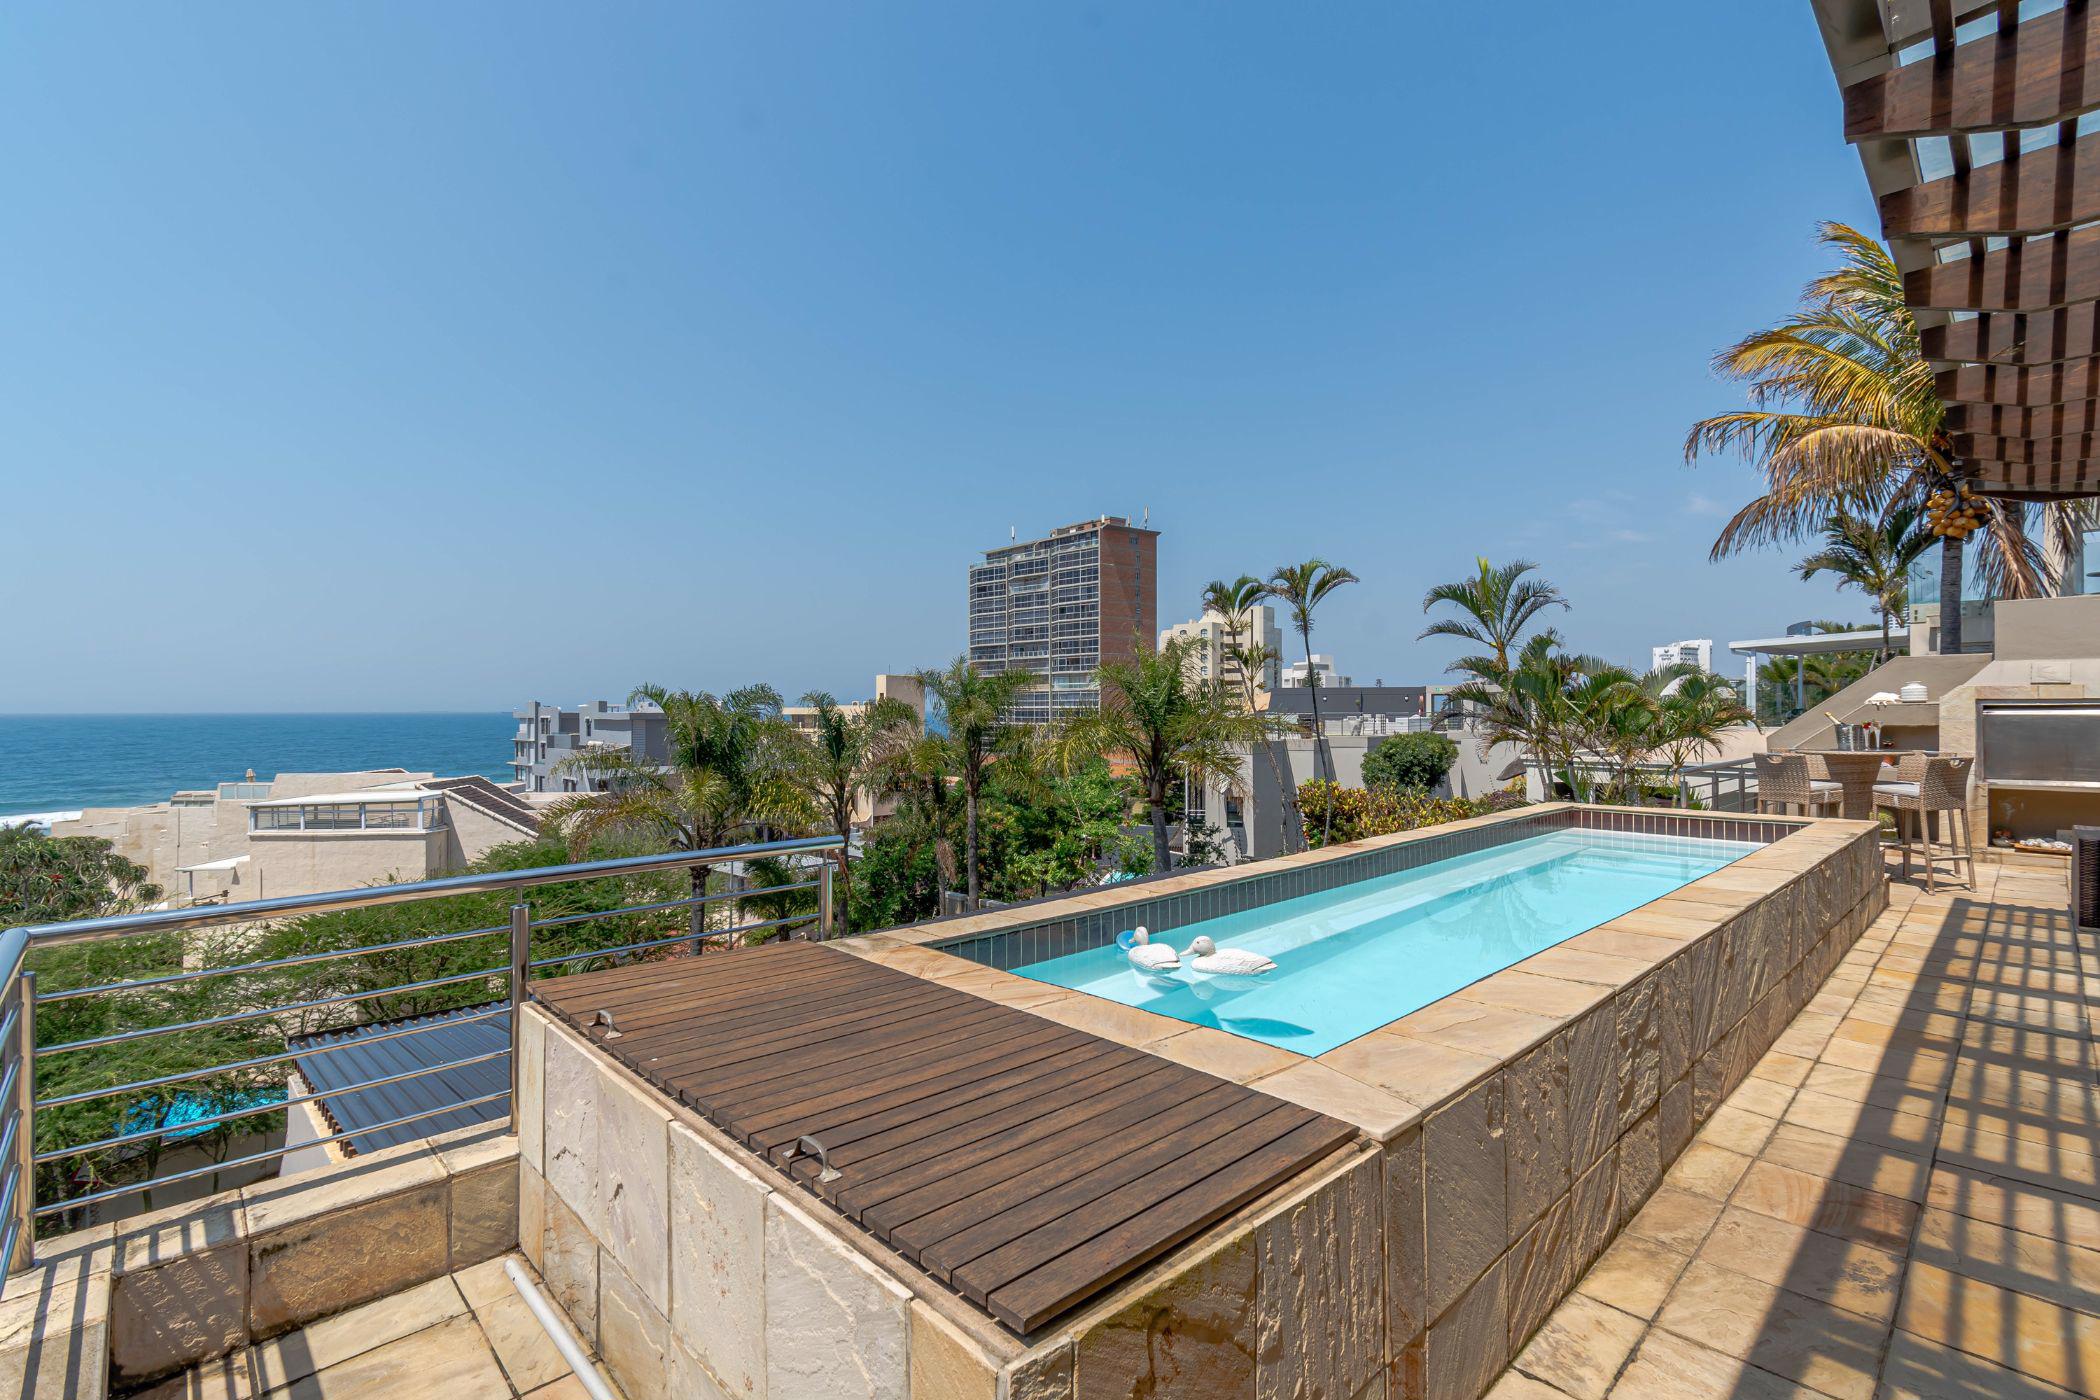 4 bedroom apartment for sale in uMhlanga Rocks